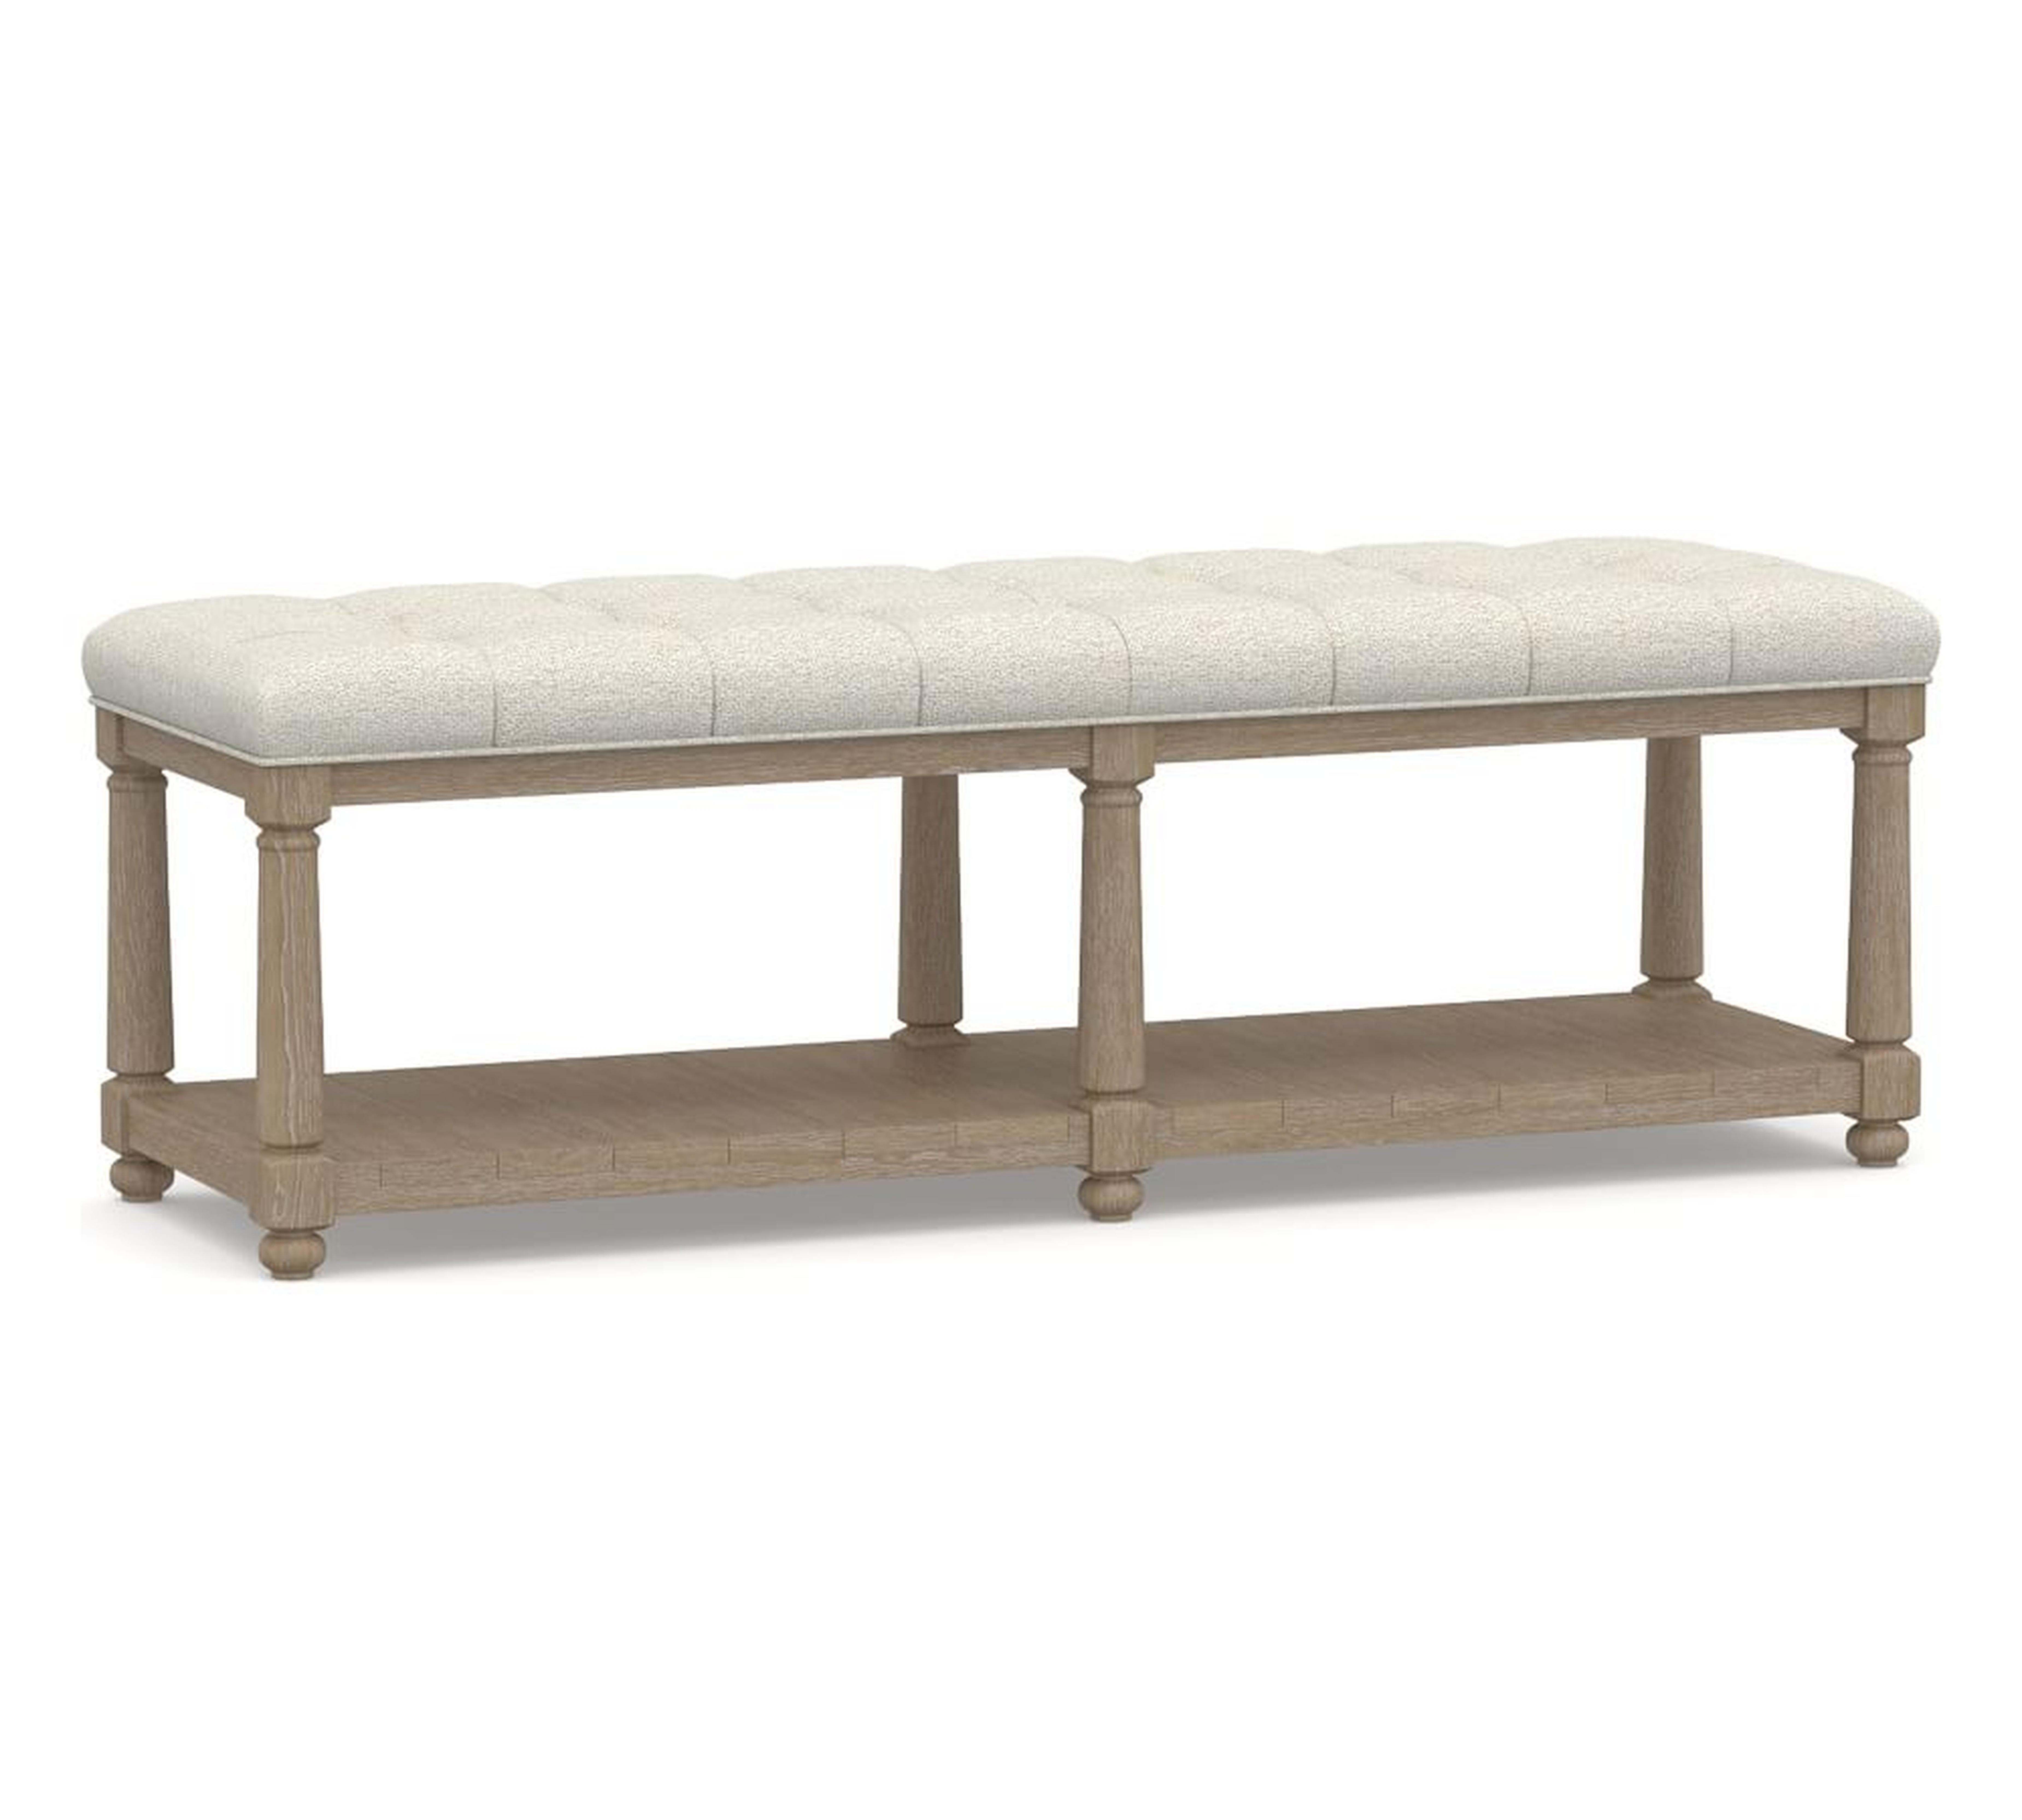 Berlin Tufted Upholstered Bench, Performance Boucle Oatmeal - Pottery Barn